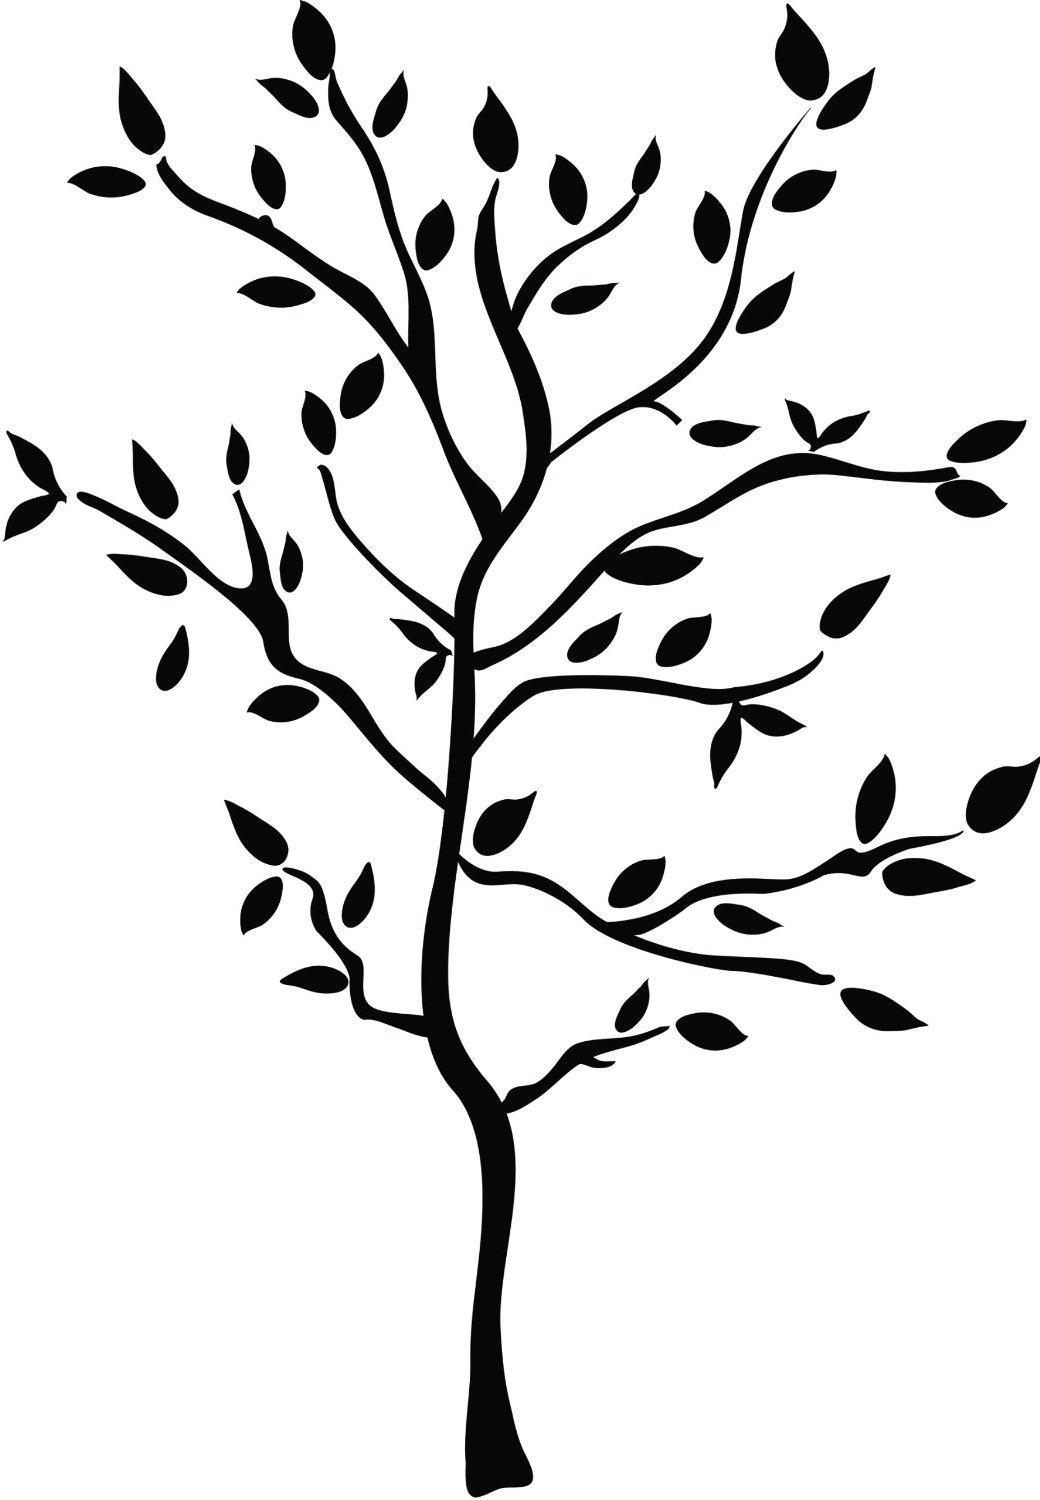 Wholesale Wall Stickers - Buy RoomMates RMK1317GM Tree Branches ...